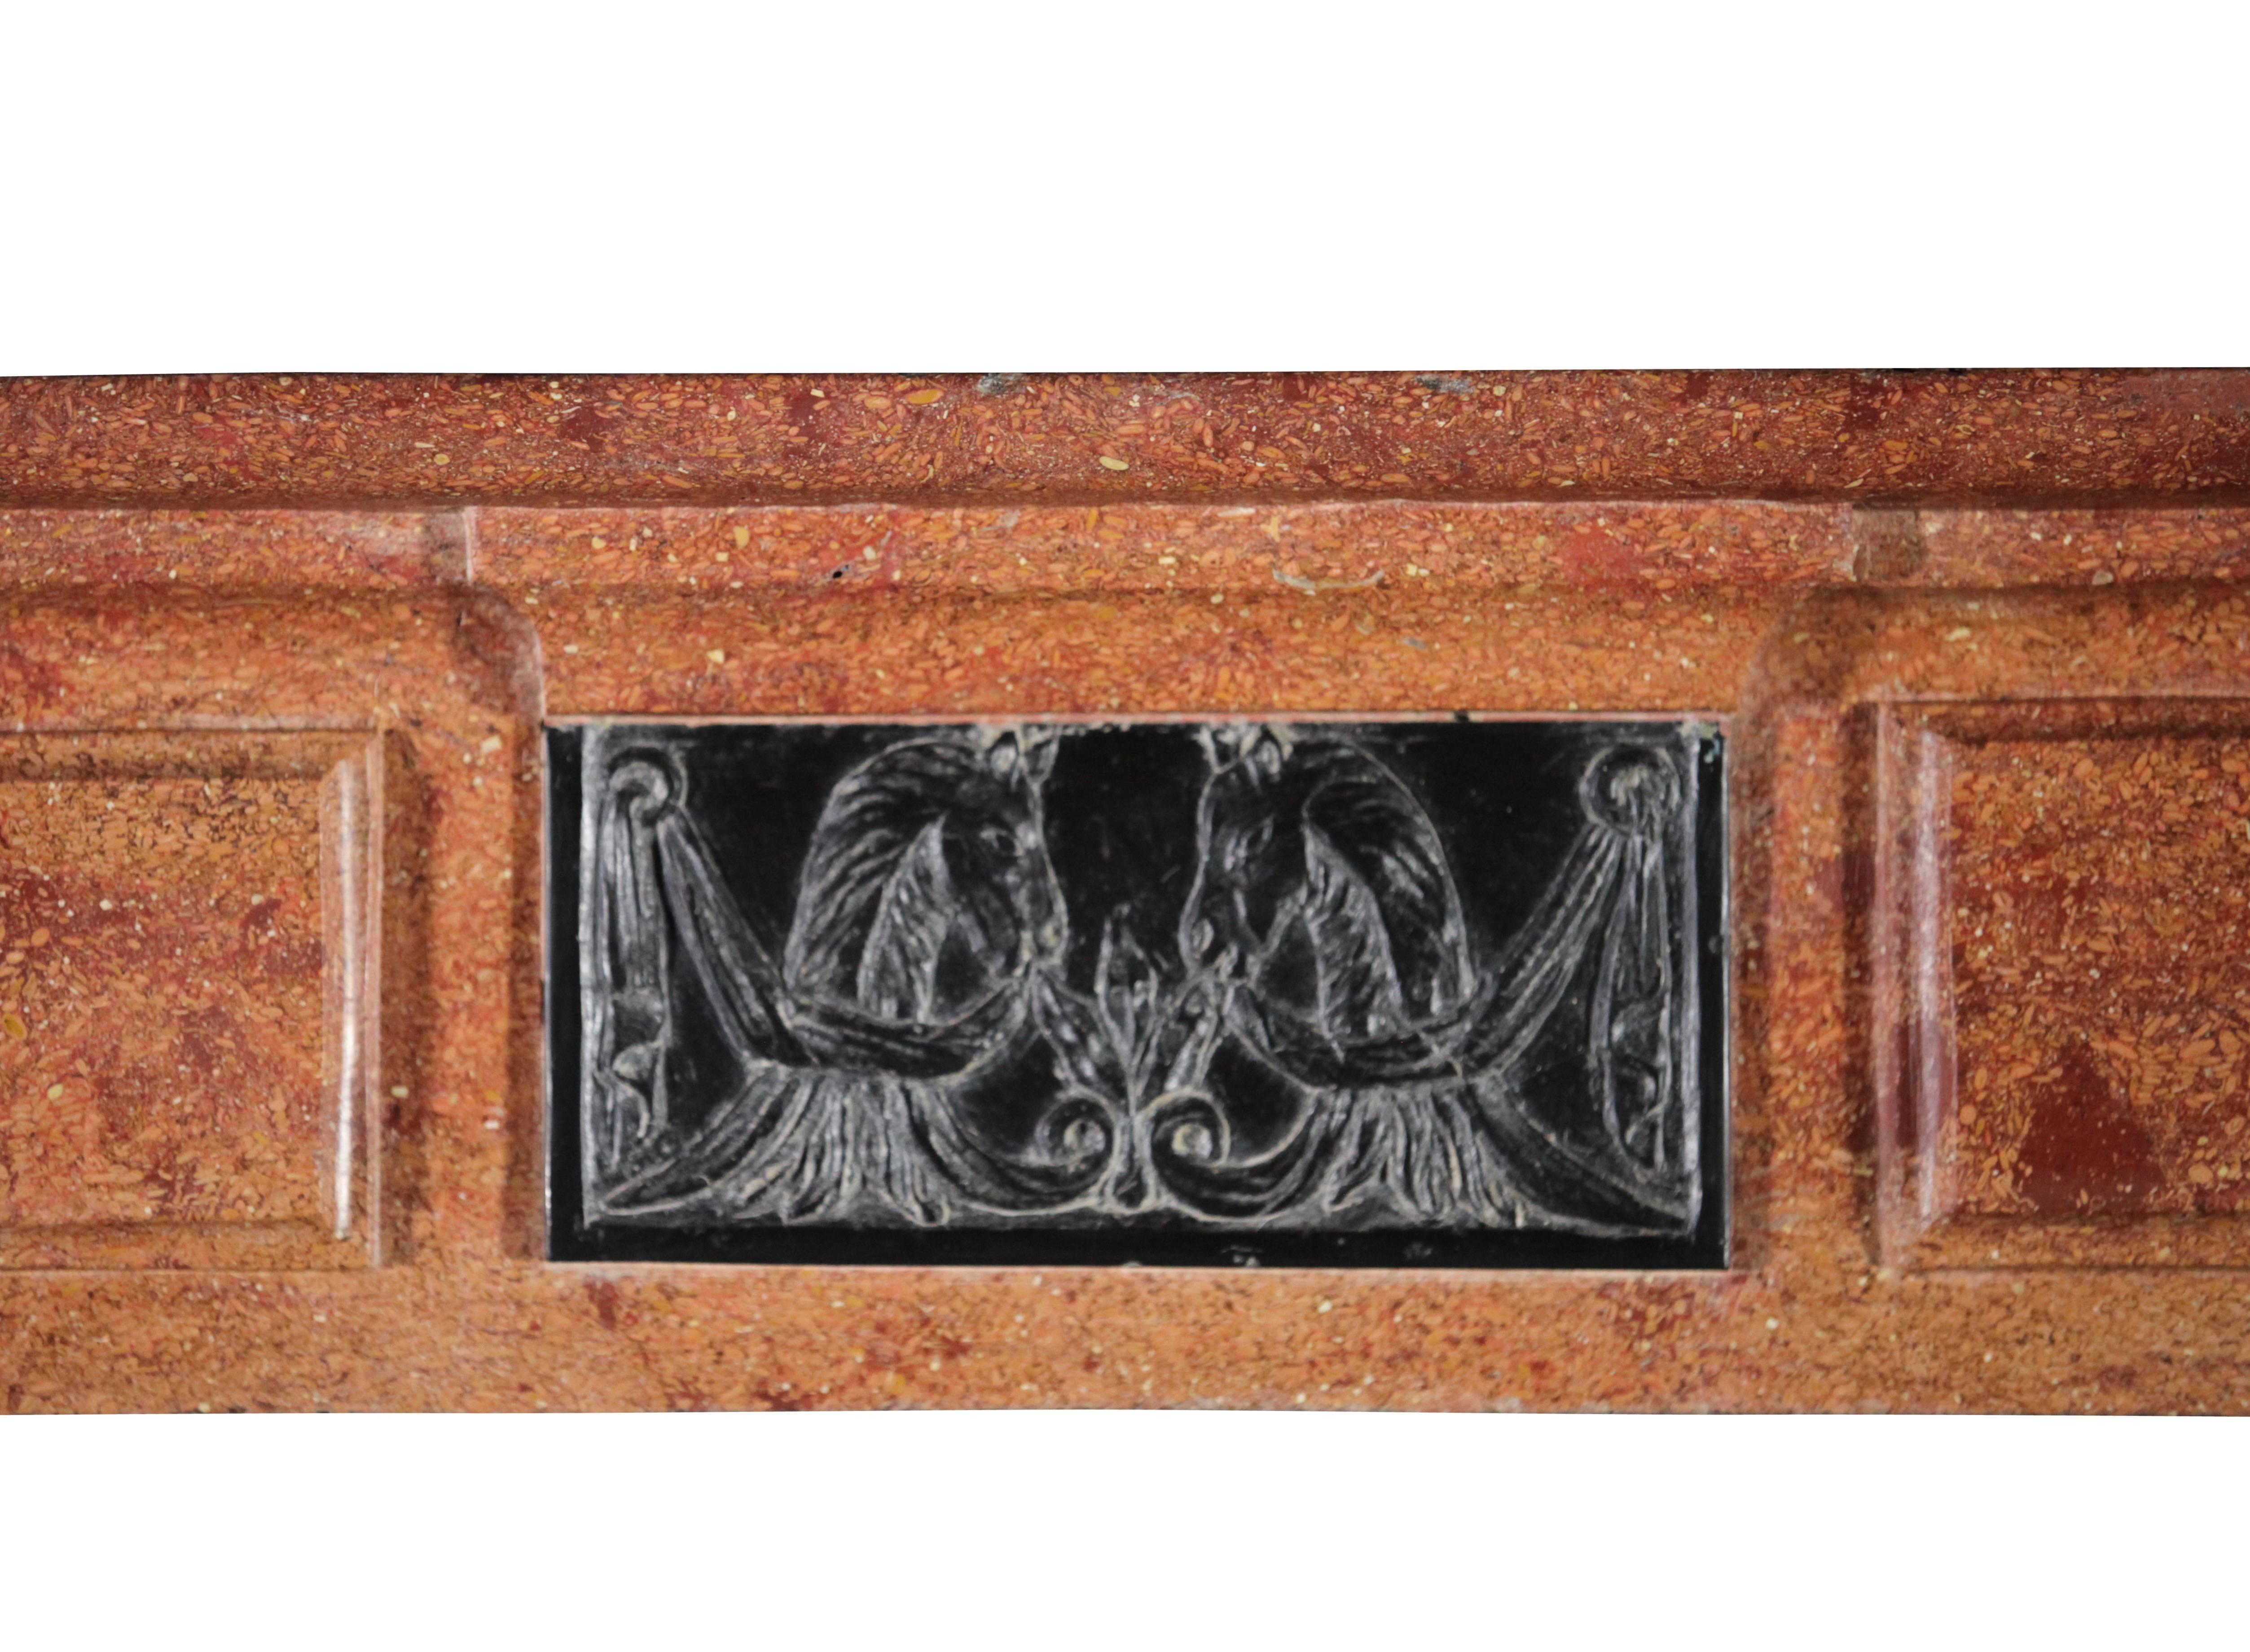 A phenomenal Directoire period fireplace mantel in hard stone with Black Belgian marble inlay. The centrepiece shows horse head details. The front is unusually bowed to the back of the wall. This gives this is an extra twist. This one was installed